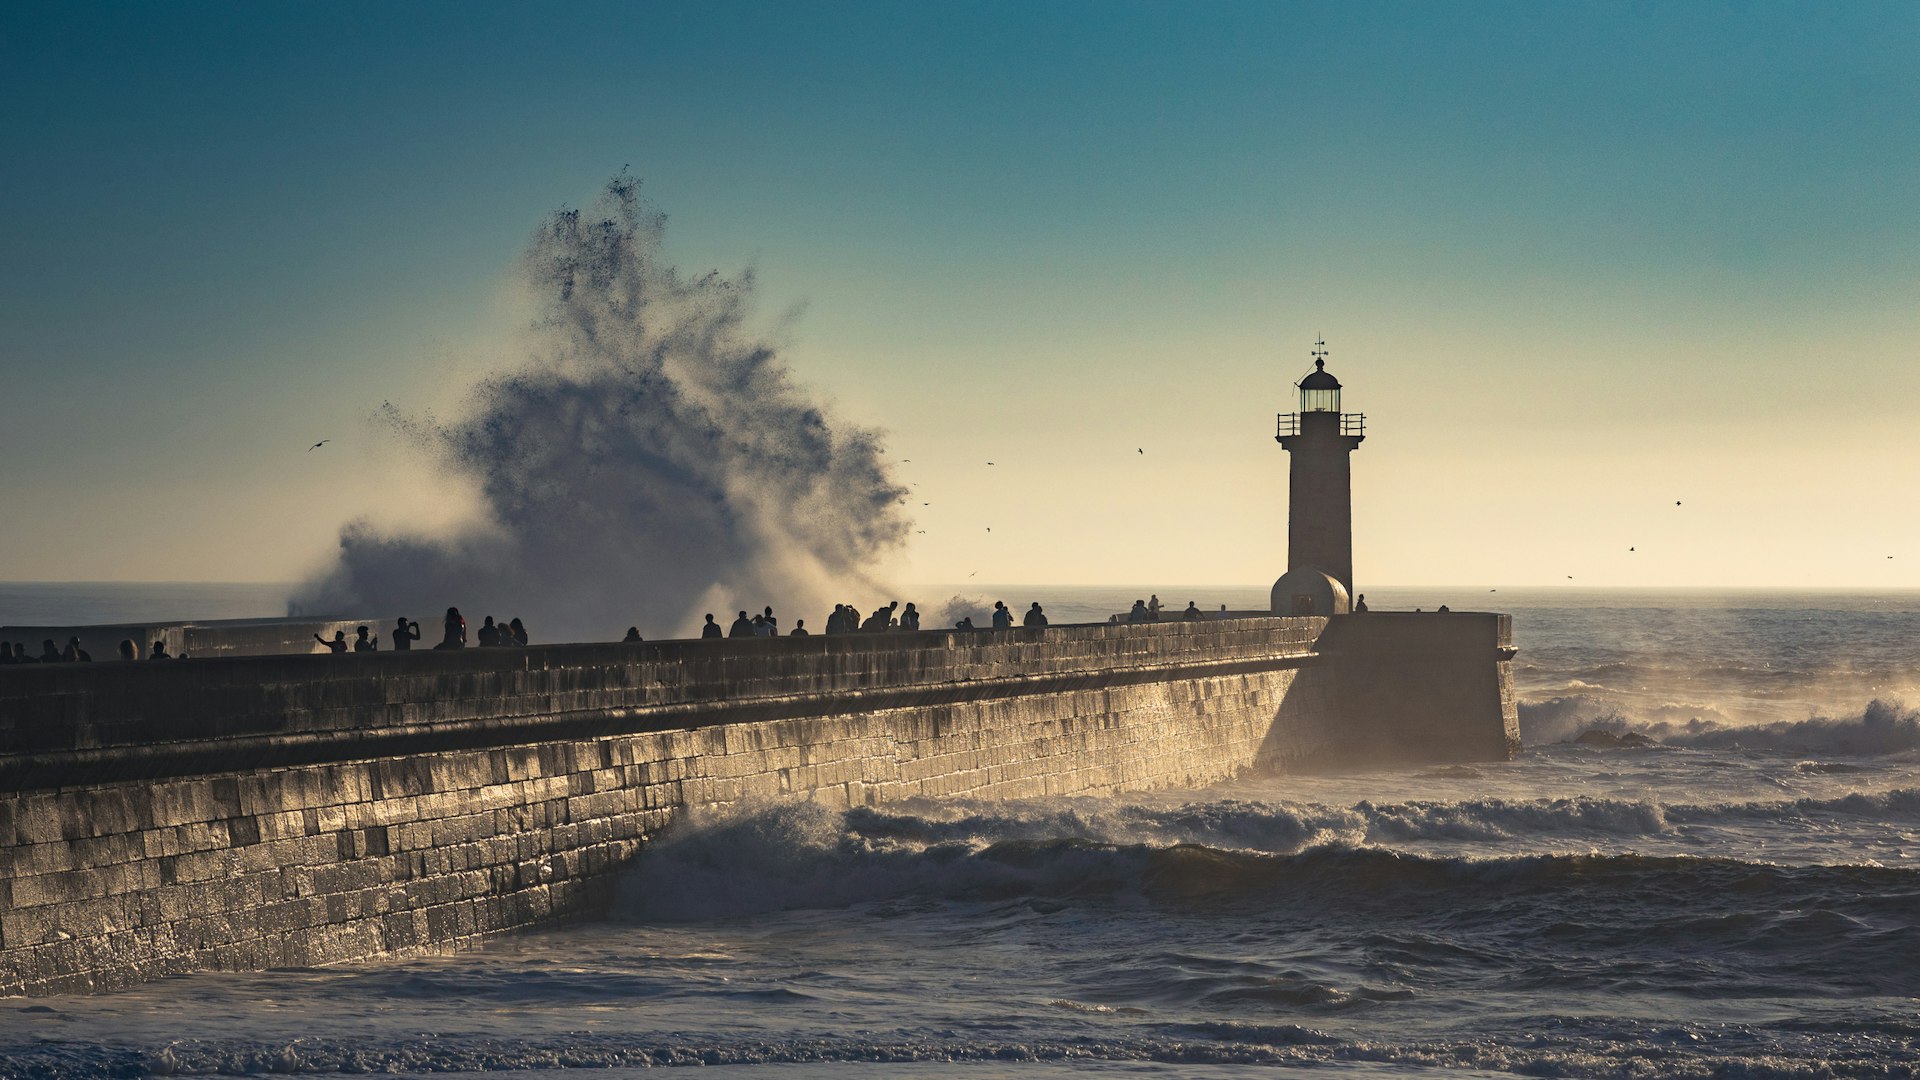 People line a harbor arm that leads to a lighthouse. Large waves crash against the harbor wall and splash high into the air